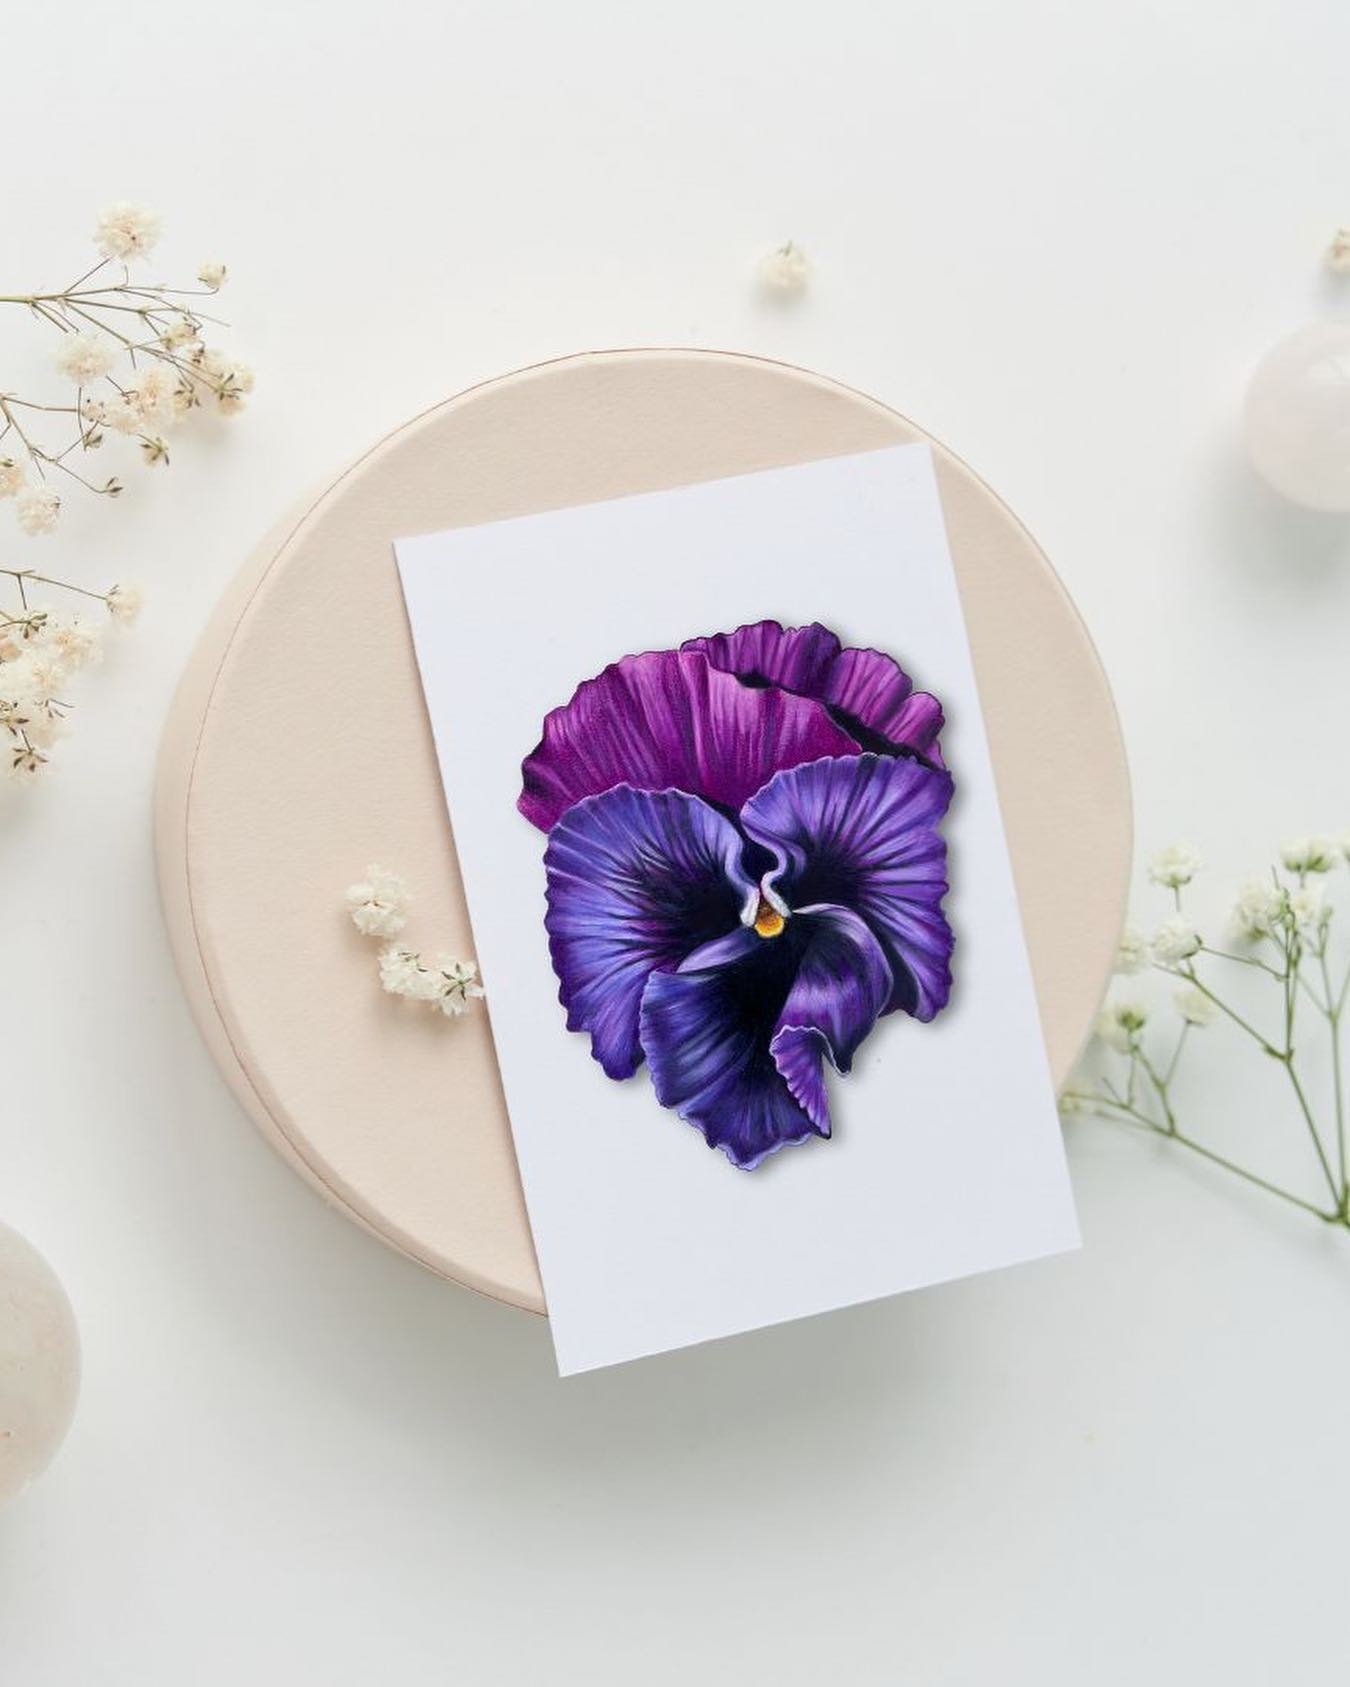 Flower two: Purple Pansy
*
A collaborative website drop with the amazing  @savkaclay
*
In this webshop drop, prints, greeting cards, stickers, plates and mugs that are limited edition will be available. The original for this piece has already sold bu